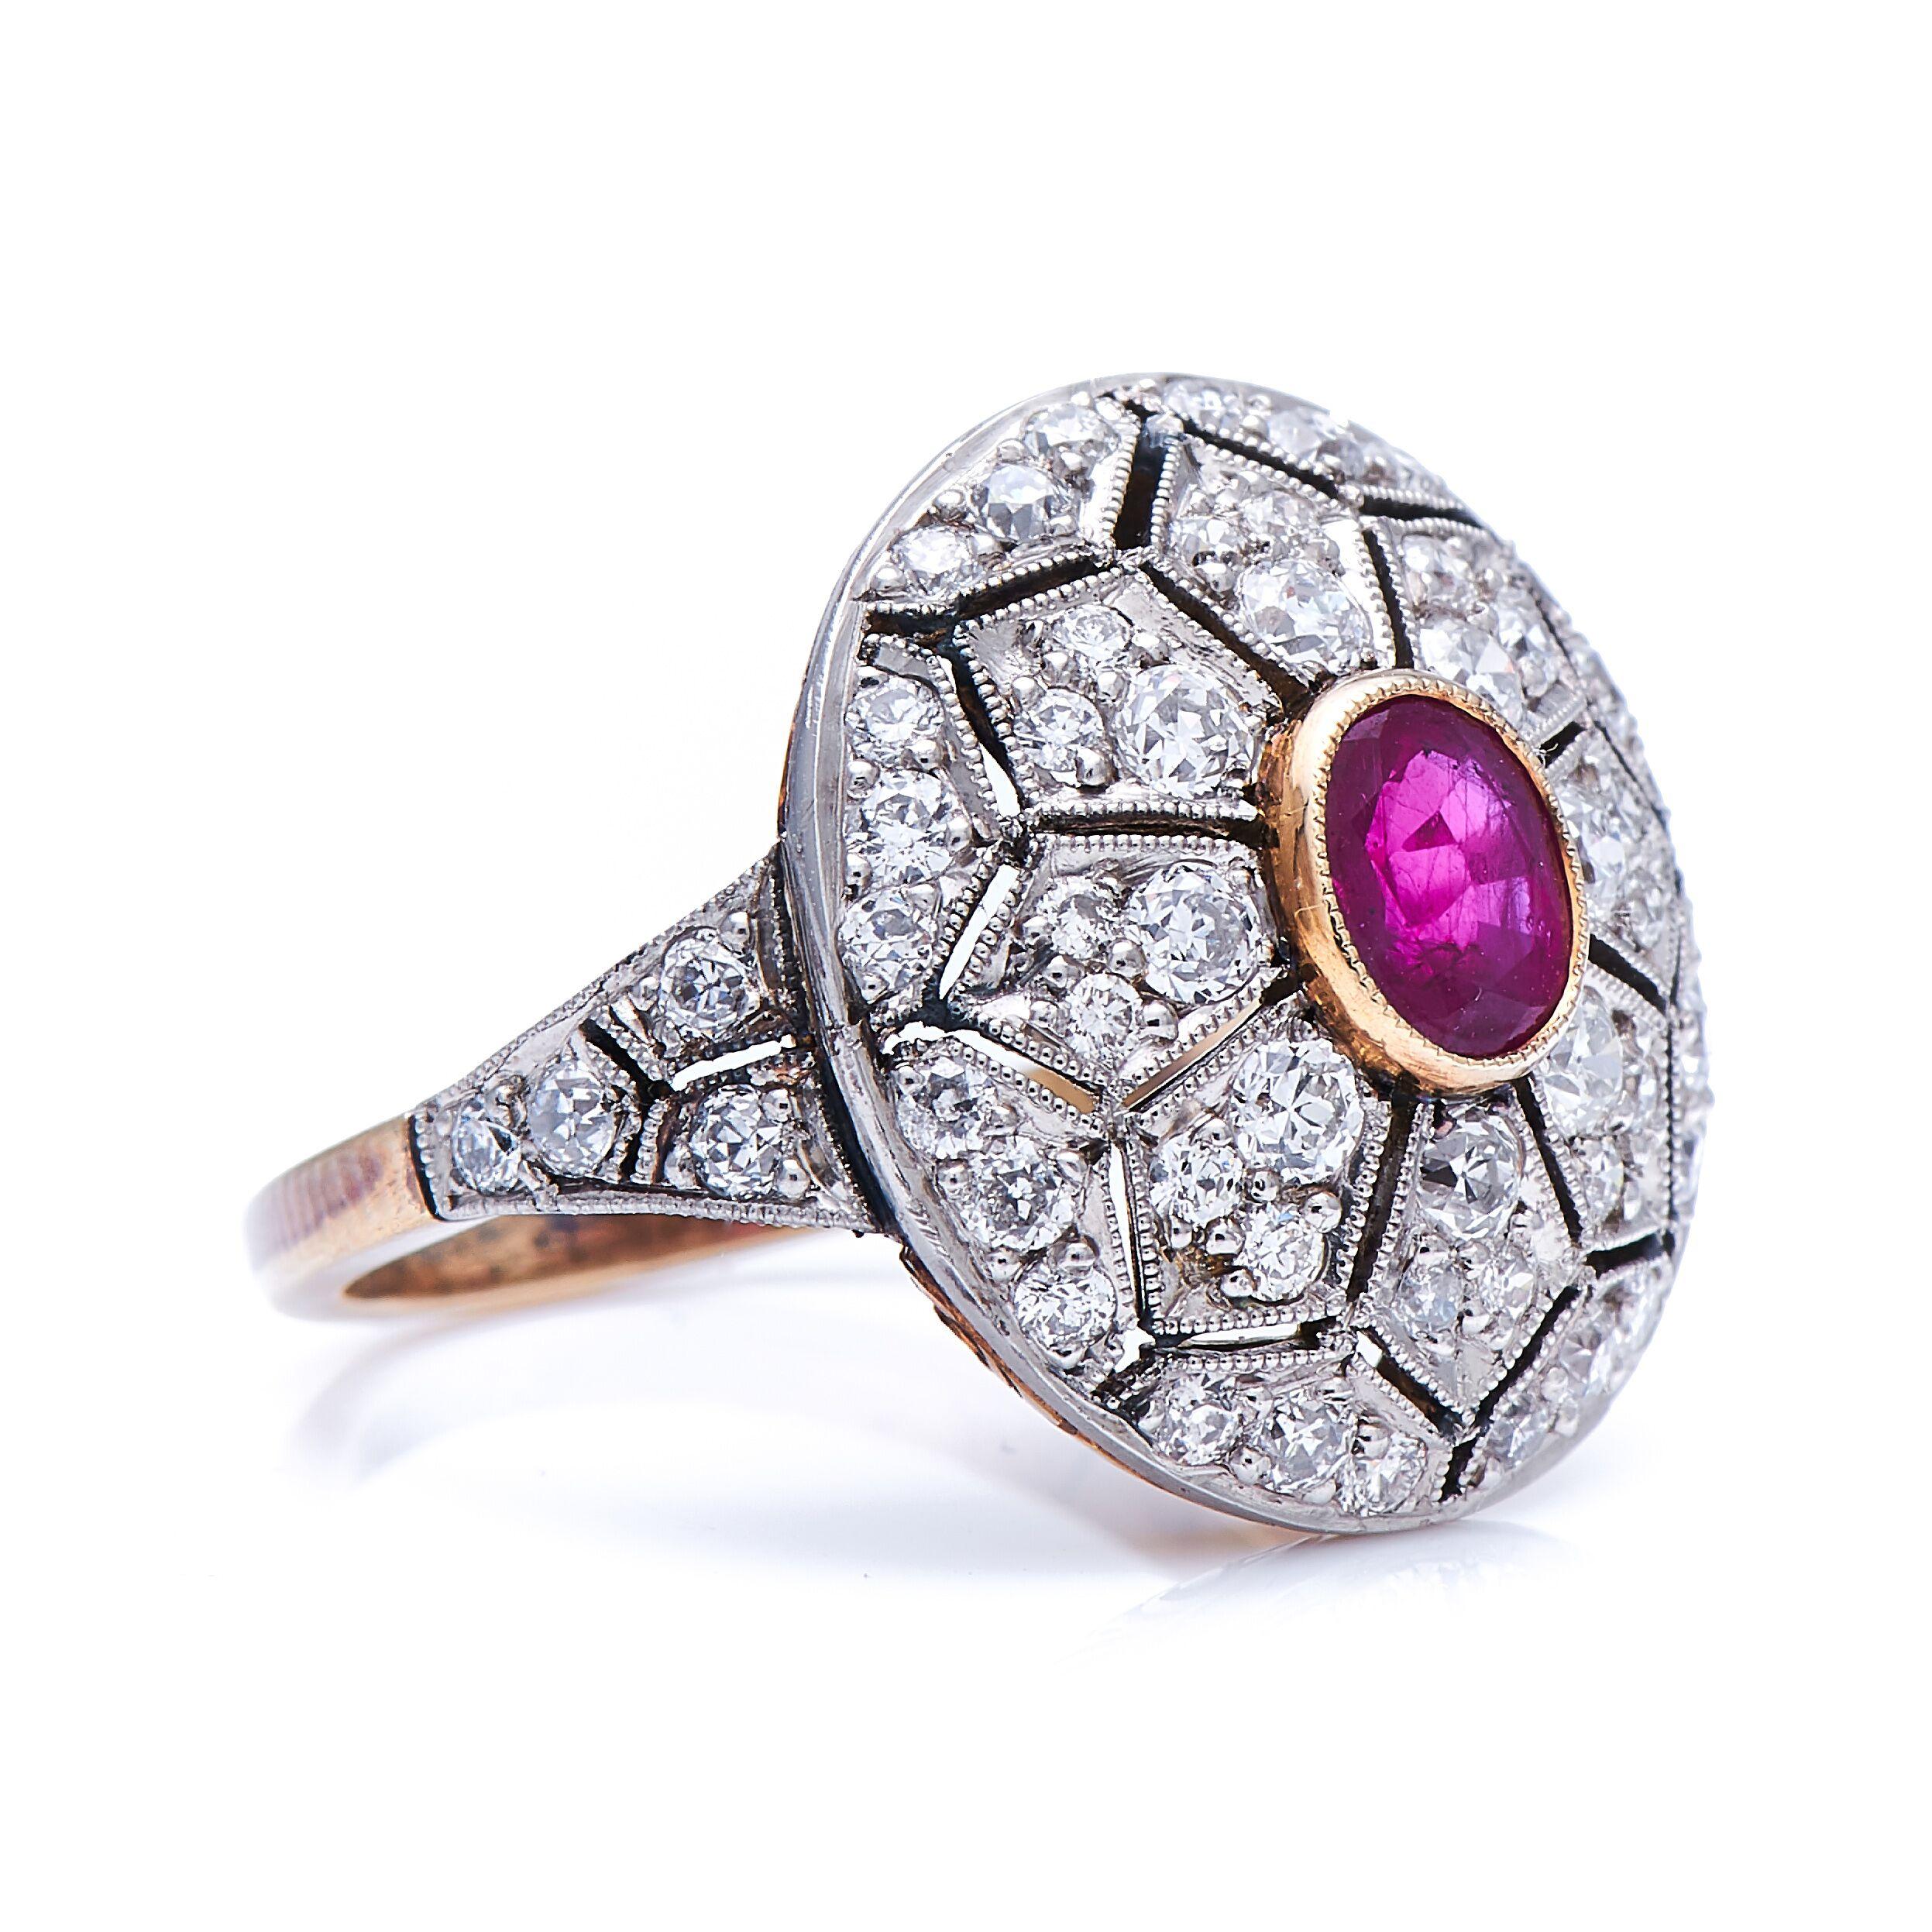 Ruby and diamond ring. This domed setting of this beautiful ruby and diamond ring is hand pierced in a geometric floral pattern. At the centre is an attractive deep red ruby weighing approximately 1 carat, smartly accentuated by a yellow gold